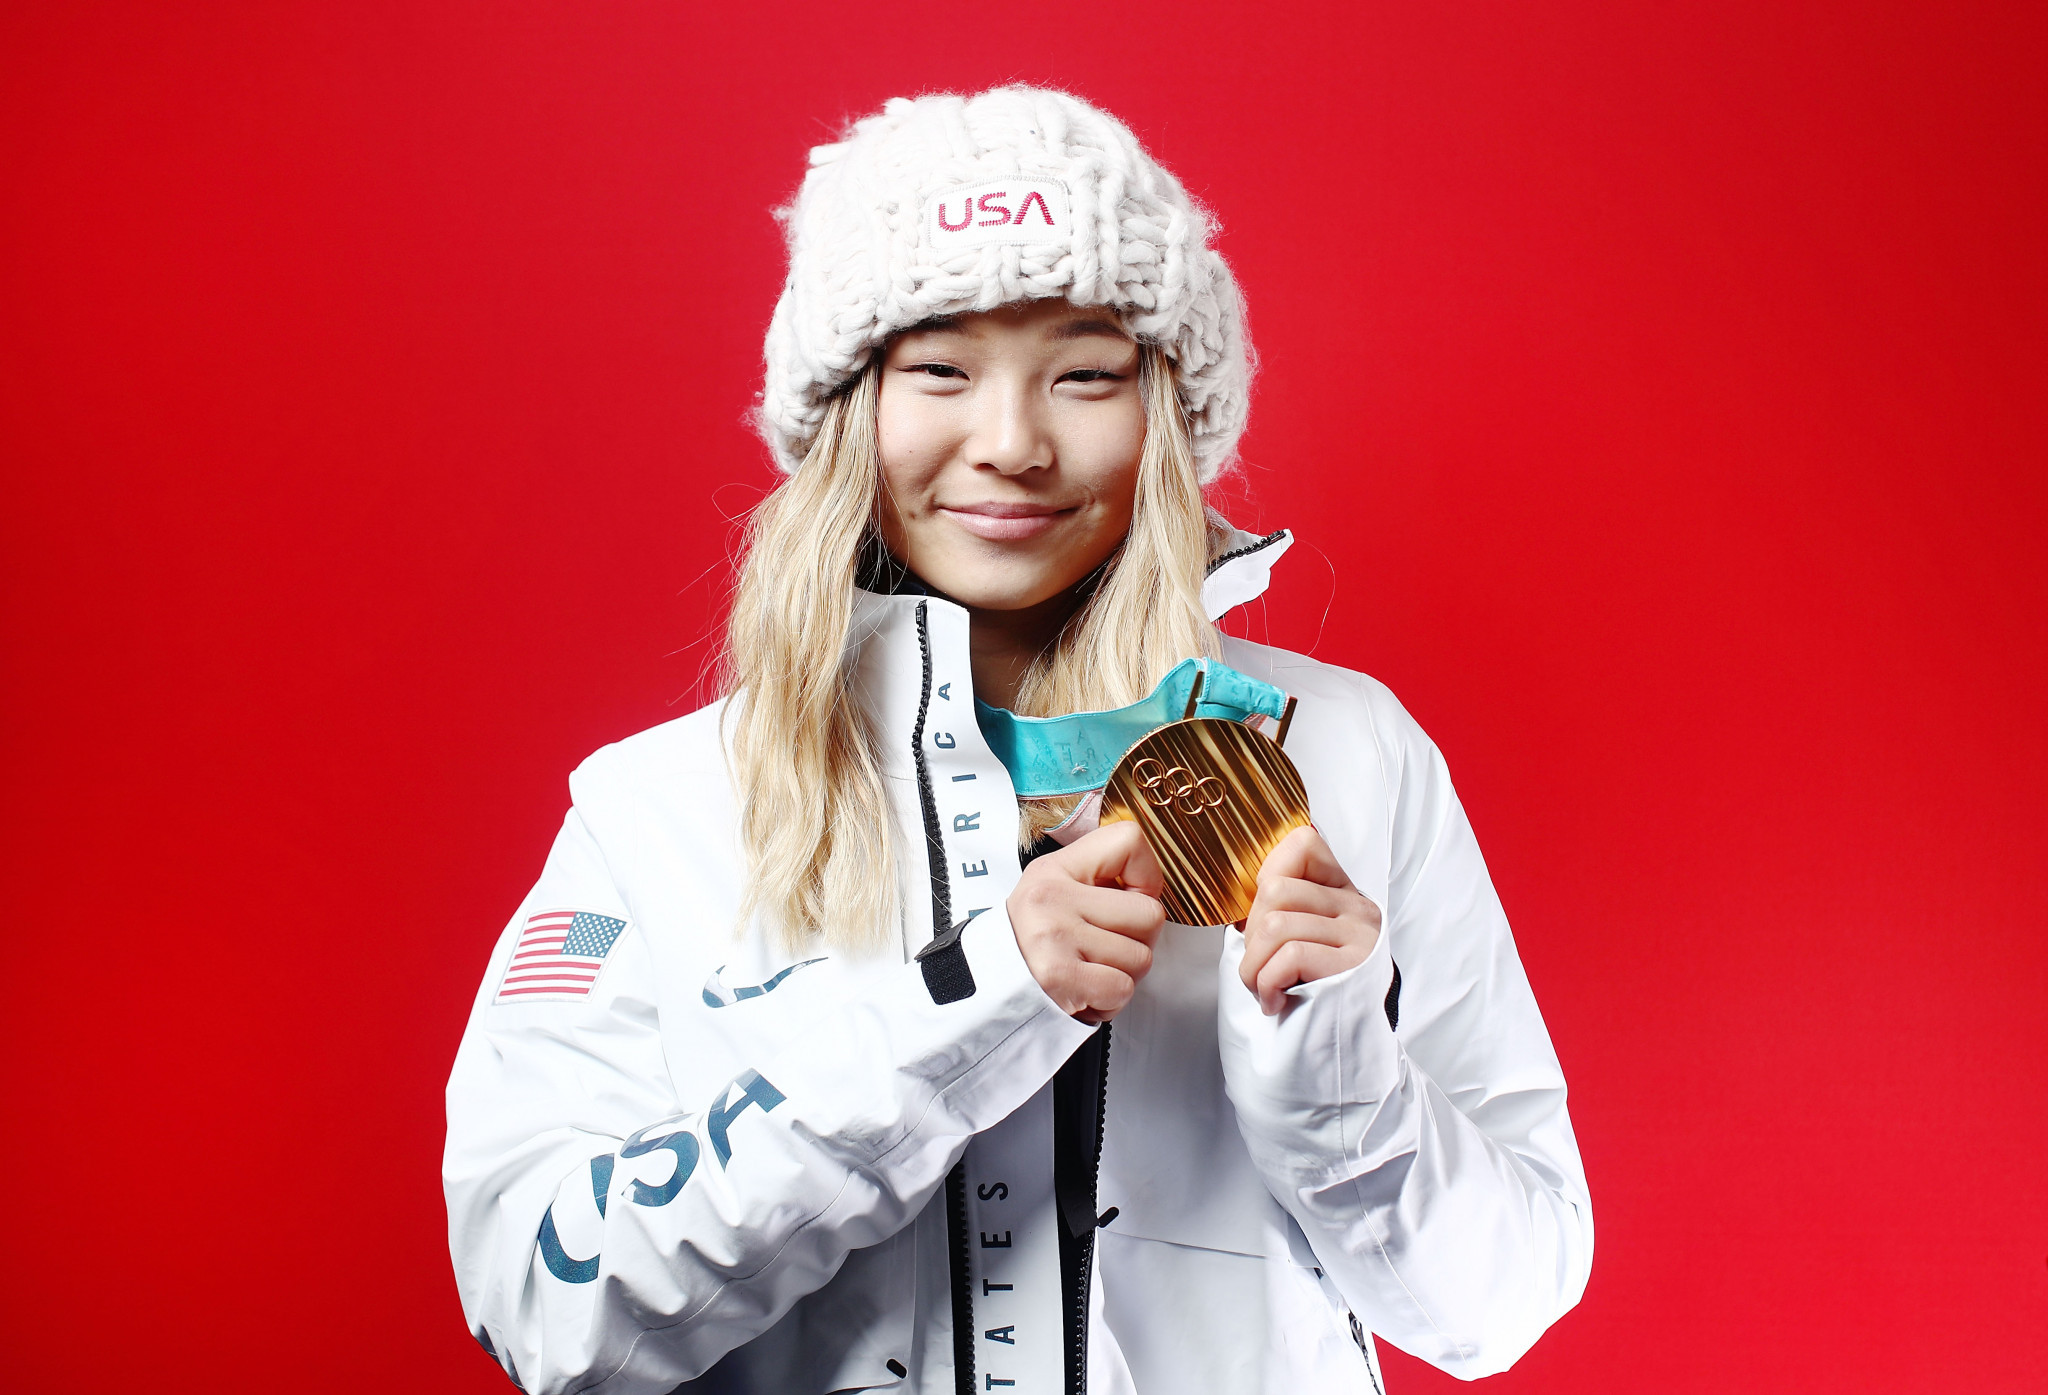 Olympic champion Kim makes history by landing snowboard trick